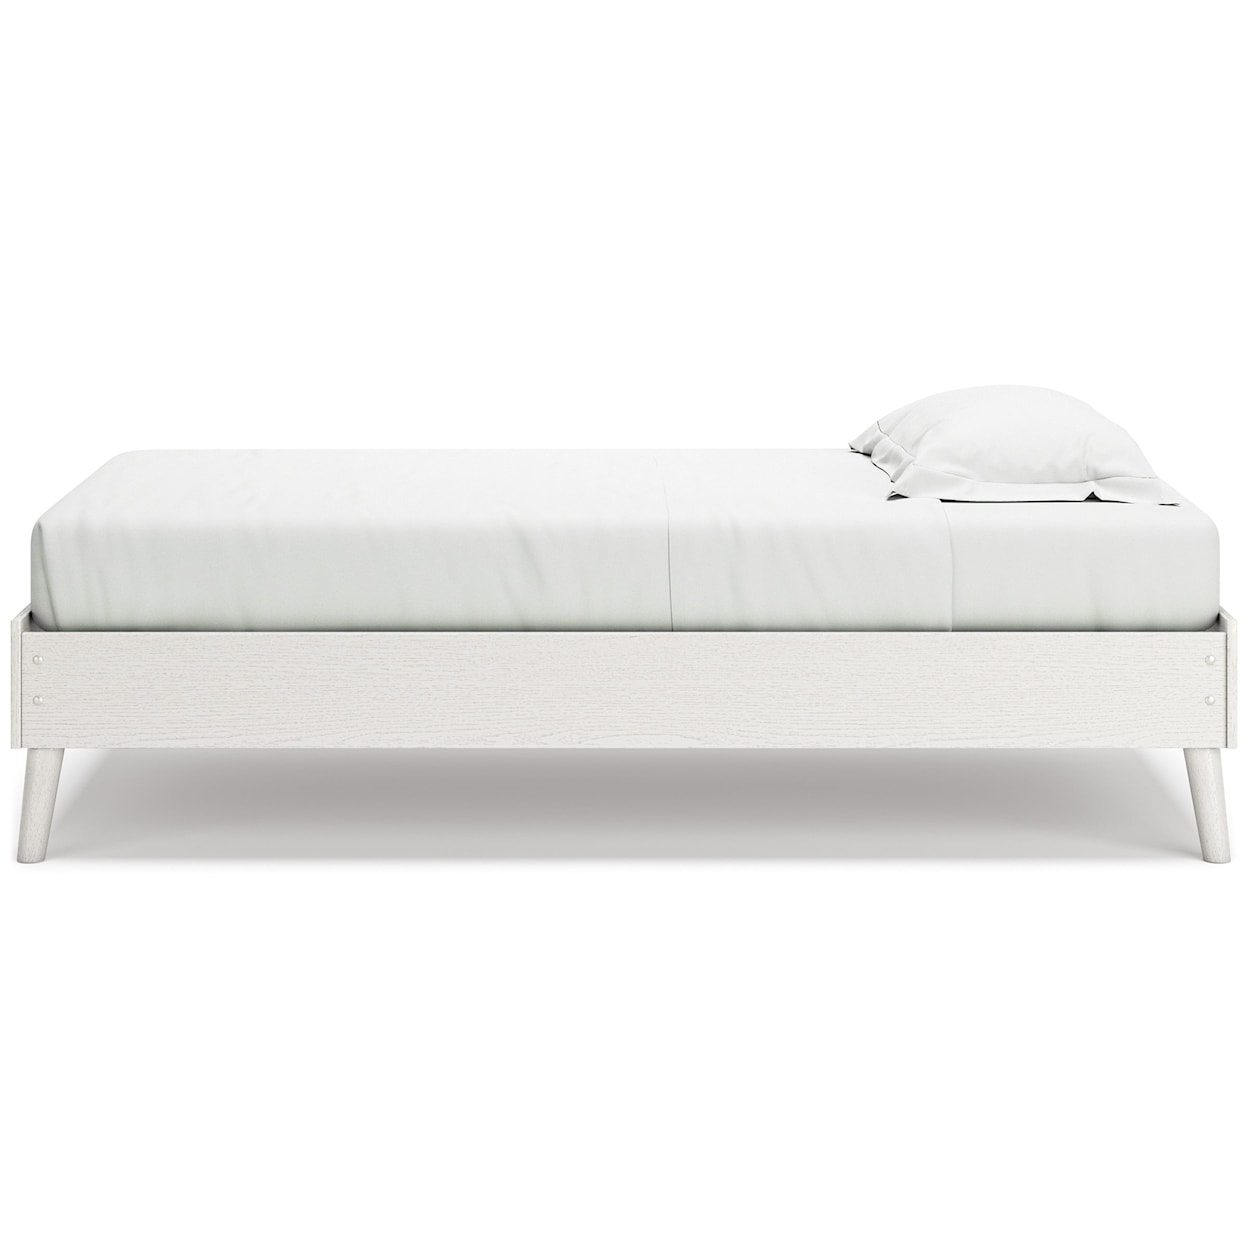 Signature Design by Ashley Aprilyn Twin Platform Bed